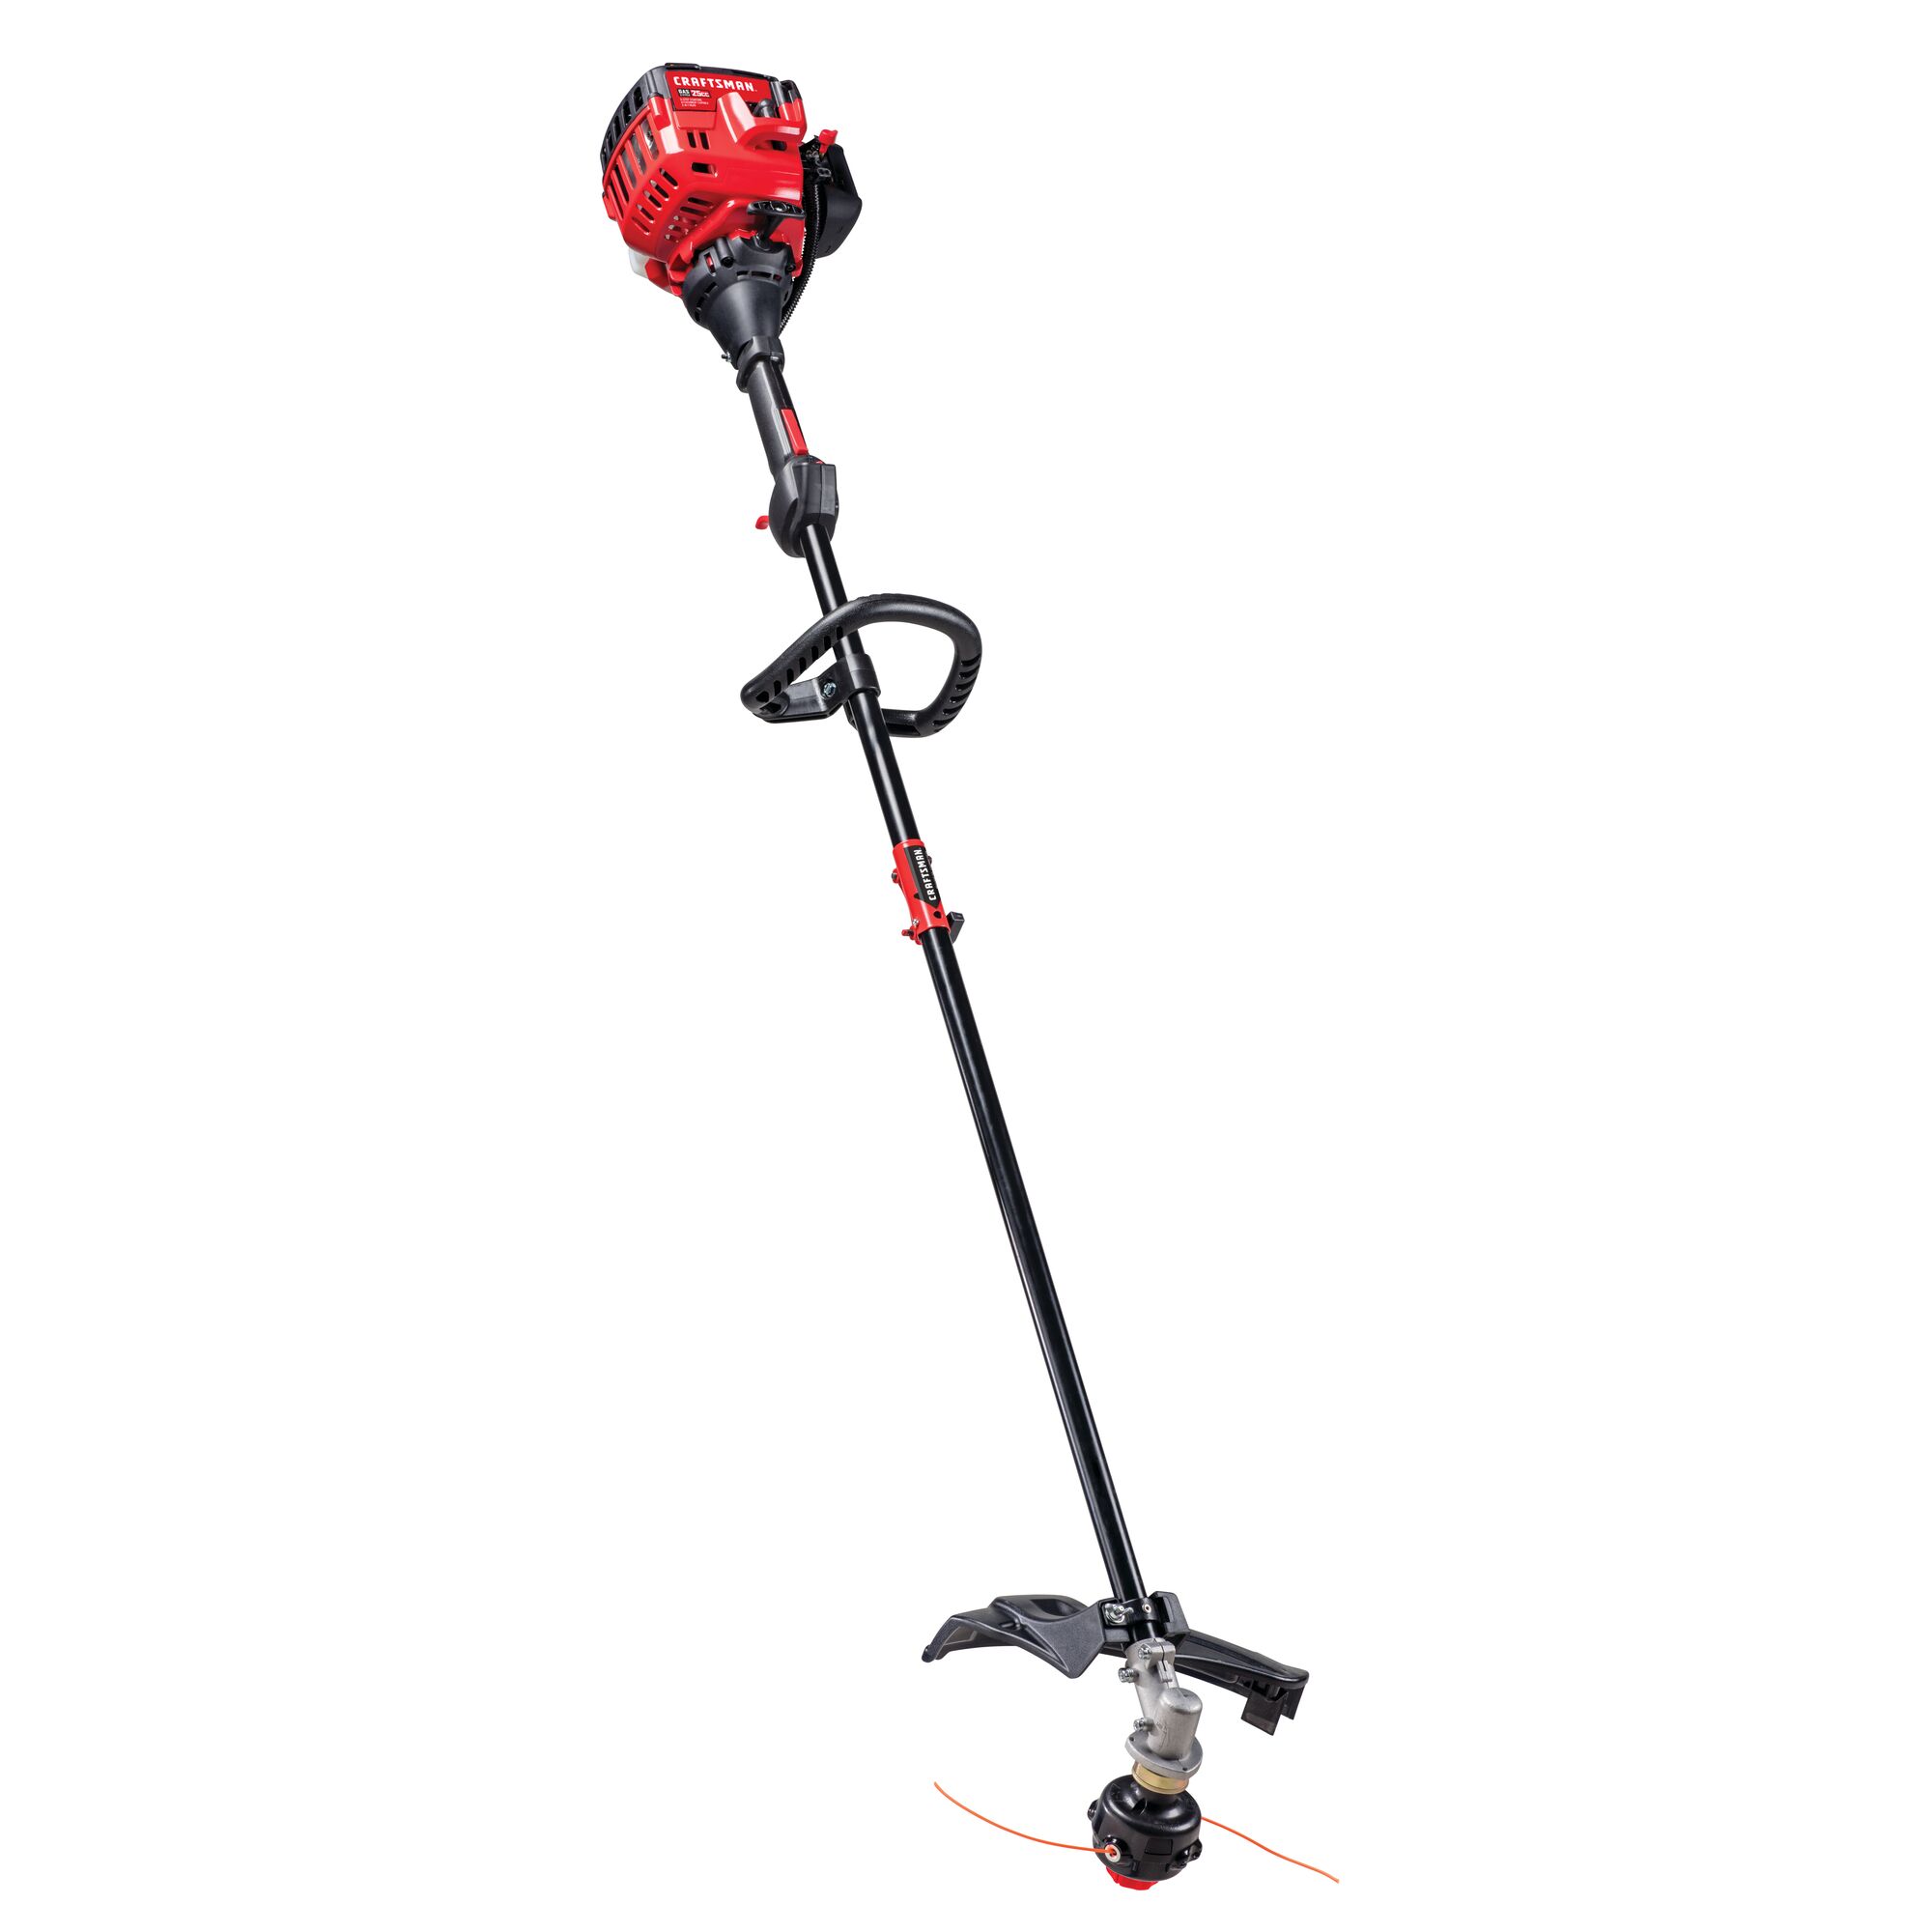 Left profile of 2 Cycle 17 inch straight shaft gas weedwacker trimmer.